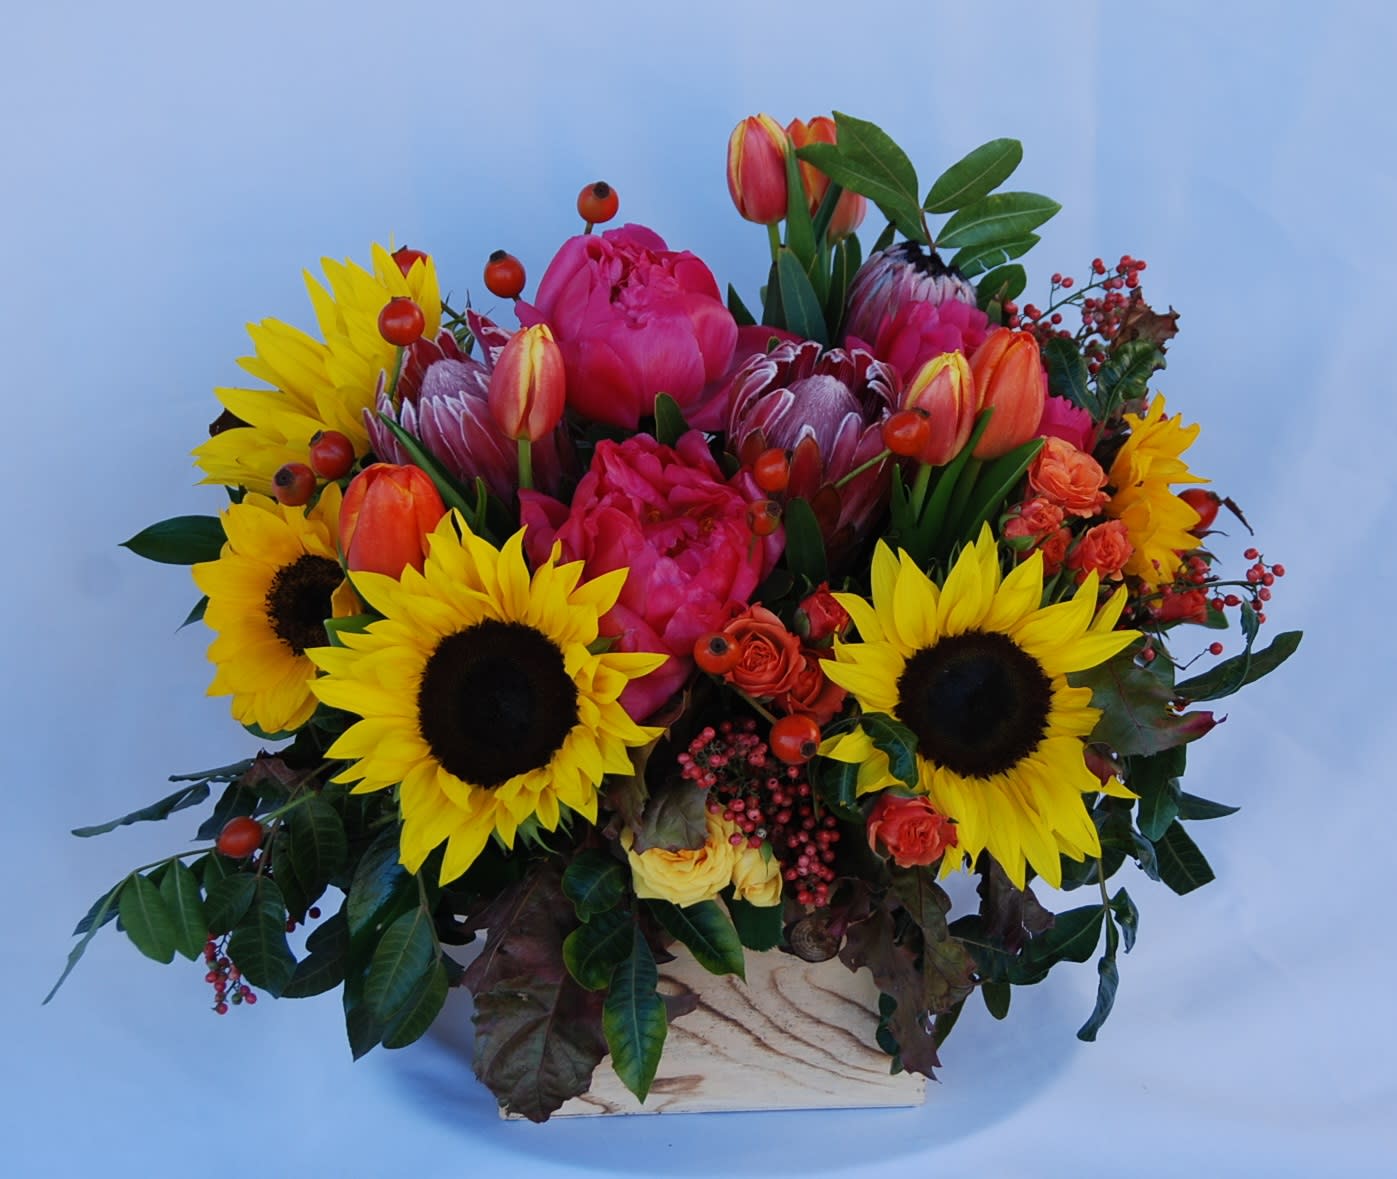 Burst of Color  - An arrangement of bright sunflowers, tulips, spray roses, proteas, and peonies accented with beautiful greenery and rose hips. 